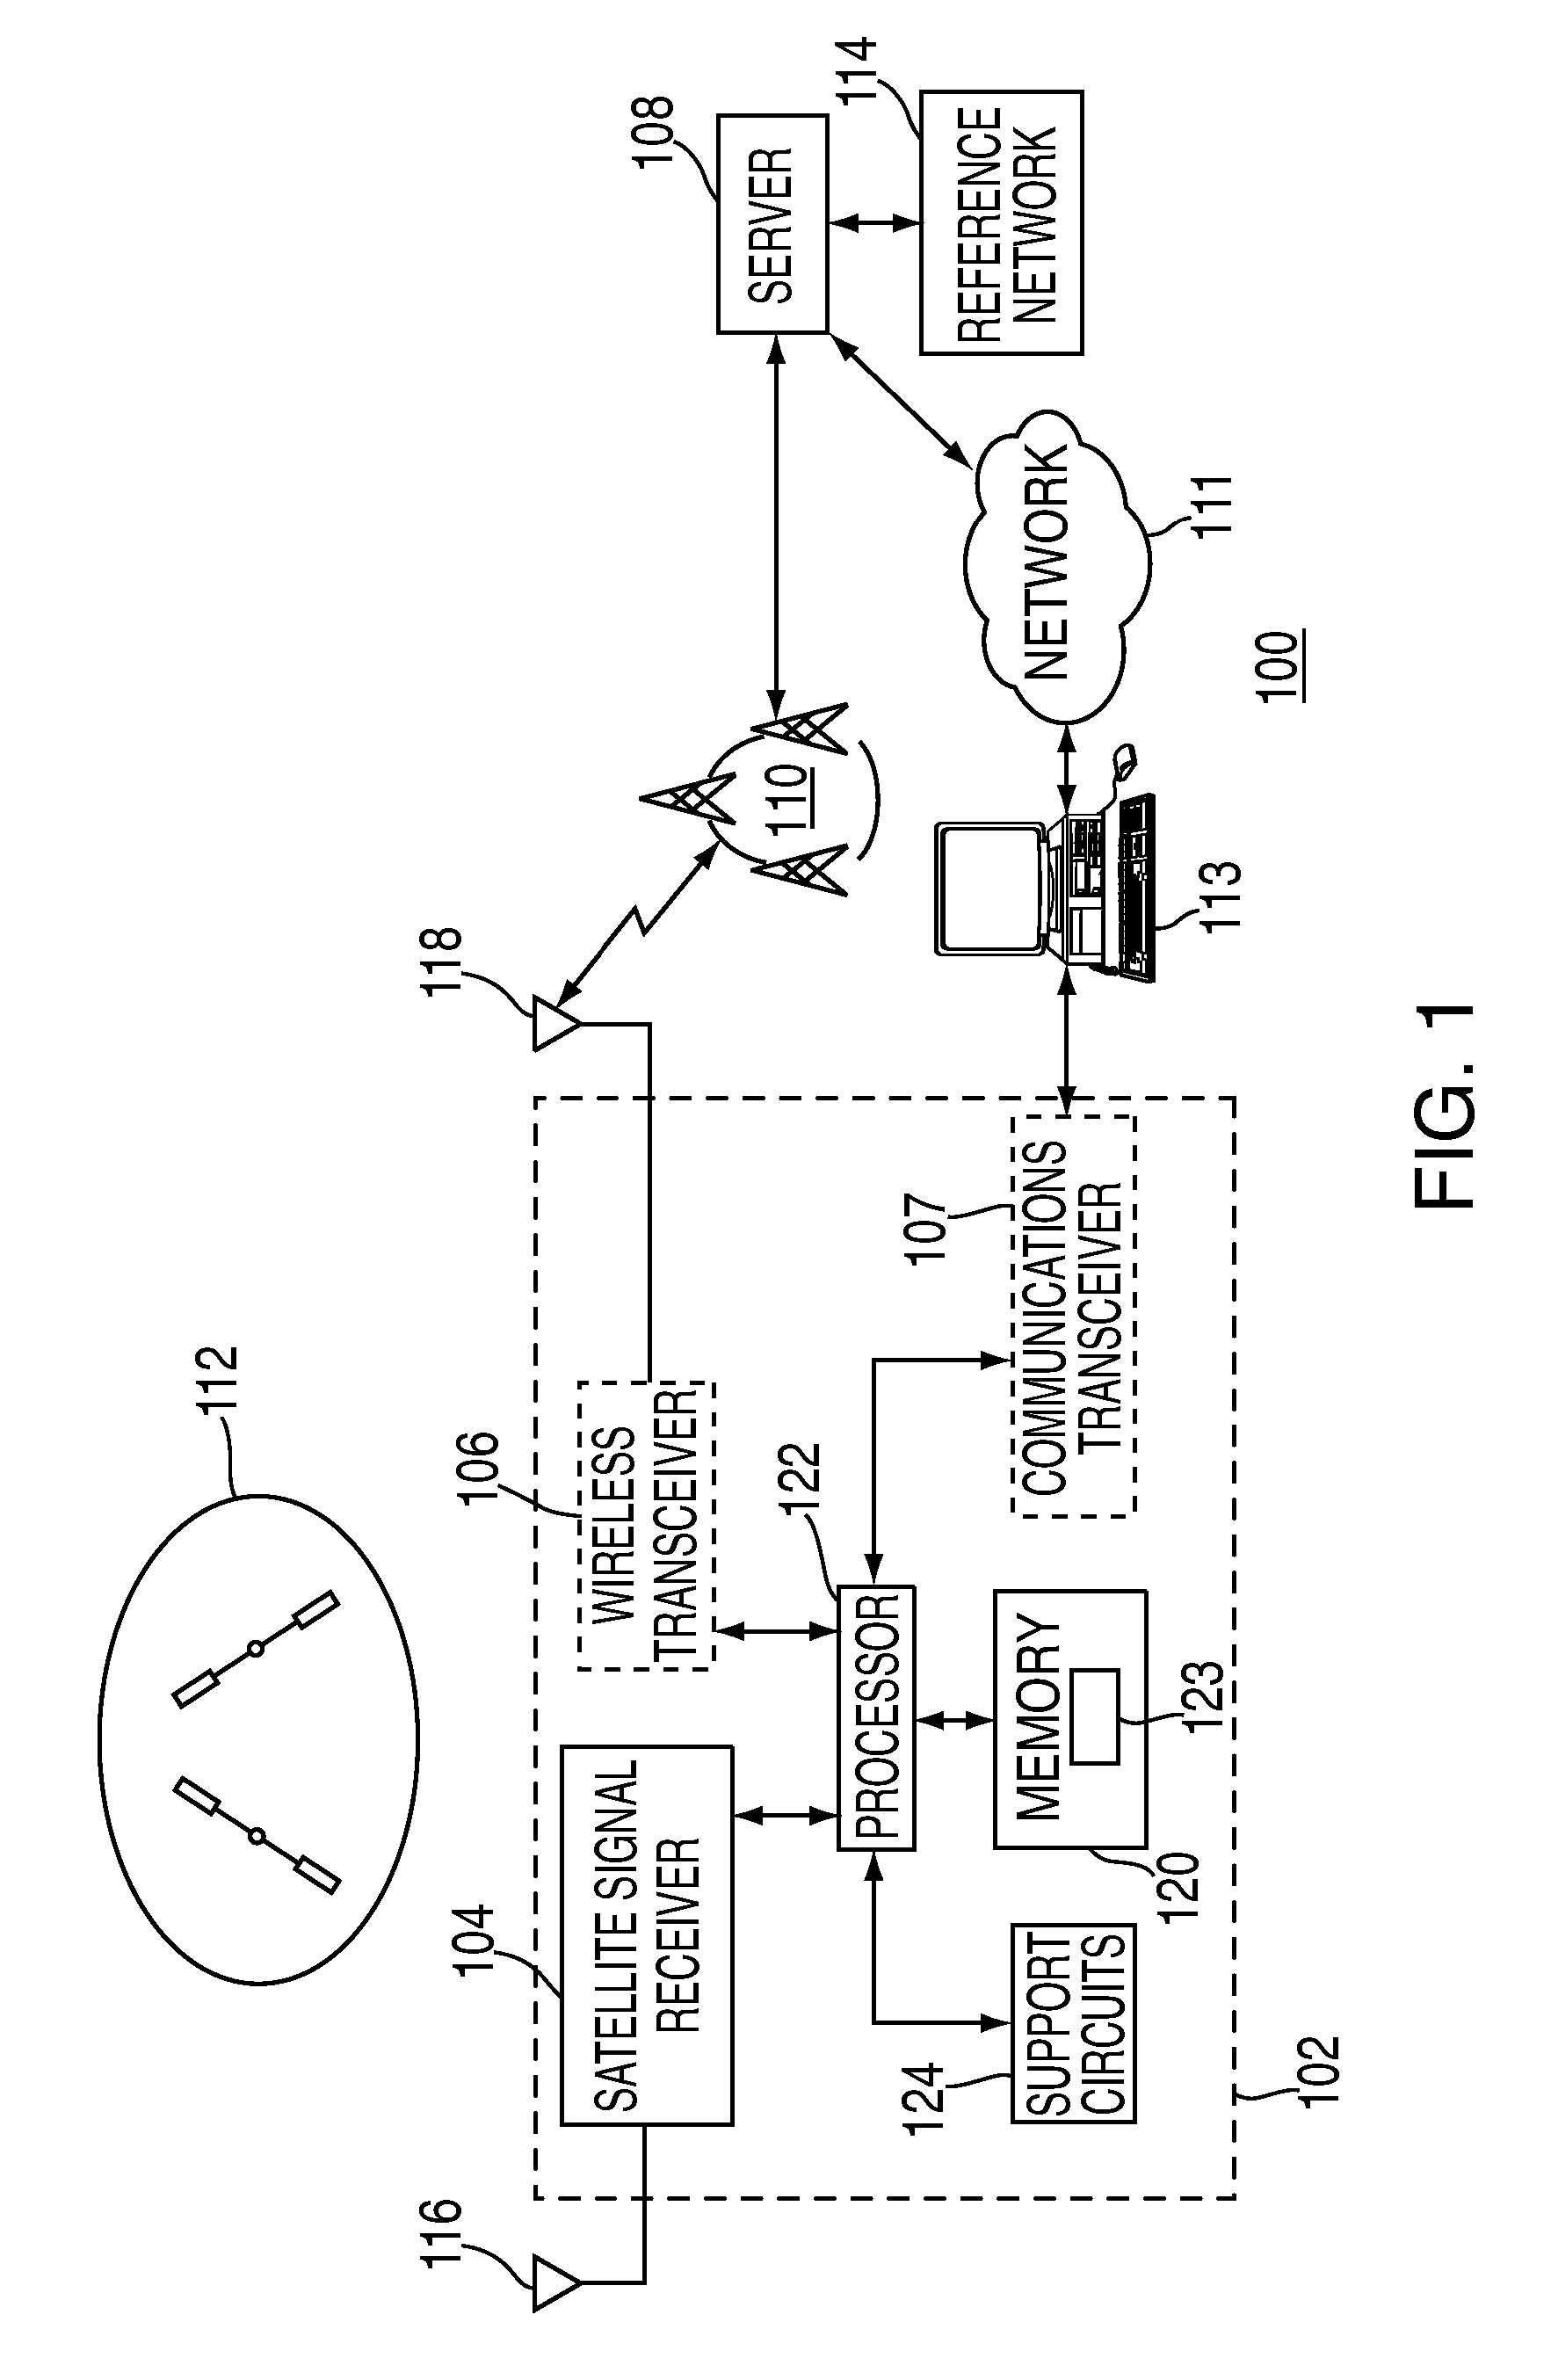 Method And Apparatus For Mitigating Multipath Effects At A Satellite Signal Receiver Using a Sequential Estimation Filter